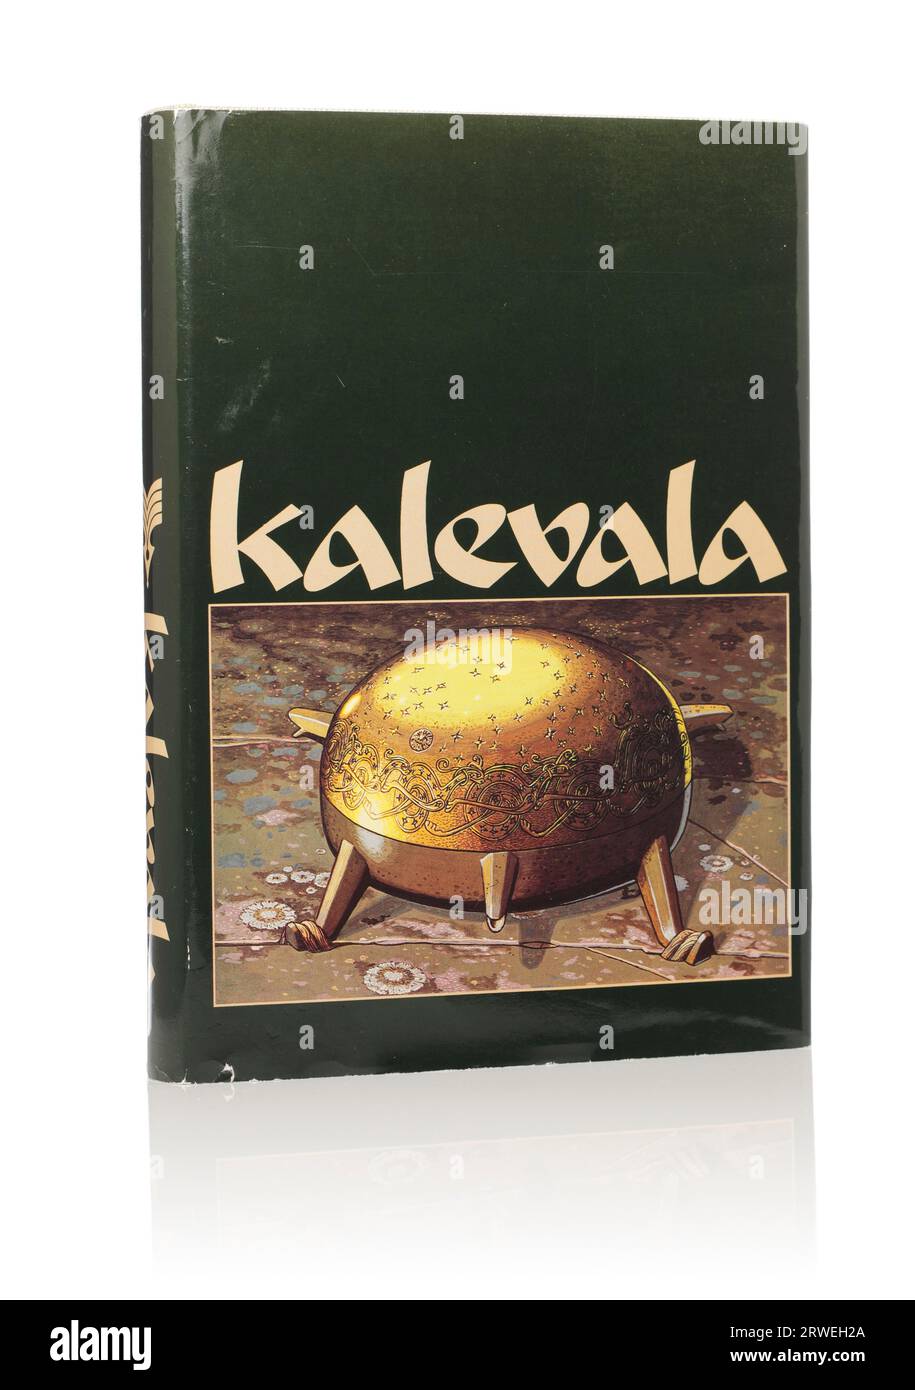 The Kalevala is a 19th century work of epic poetry compiled by Elias Loennrot from Finnish and Karelian oral folklore and mythology. Here is a 1985 Stock Photo